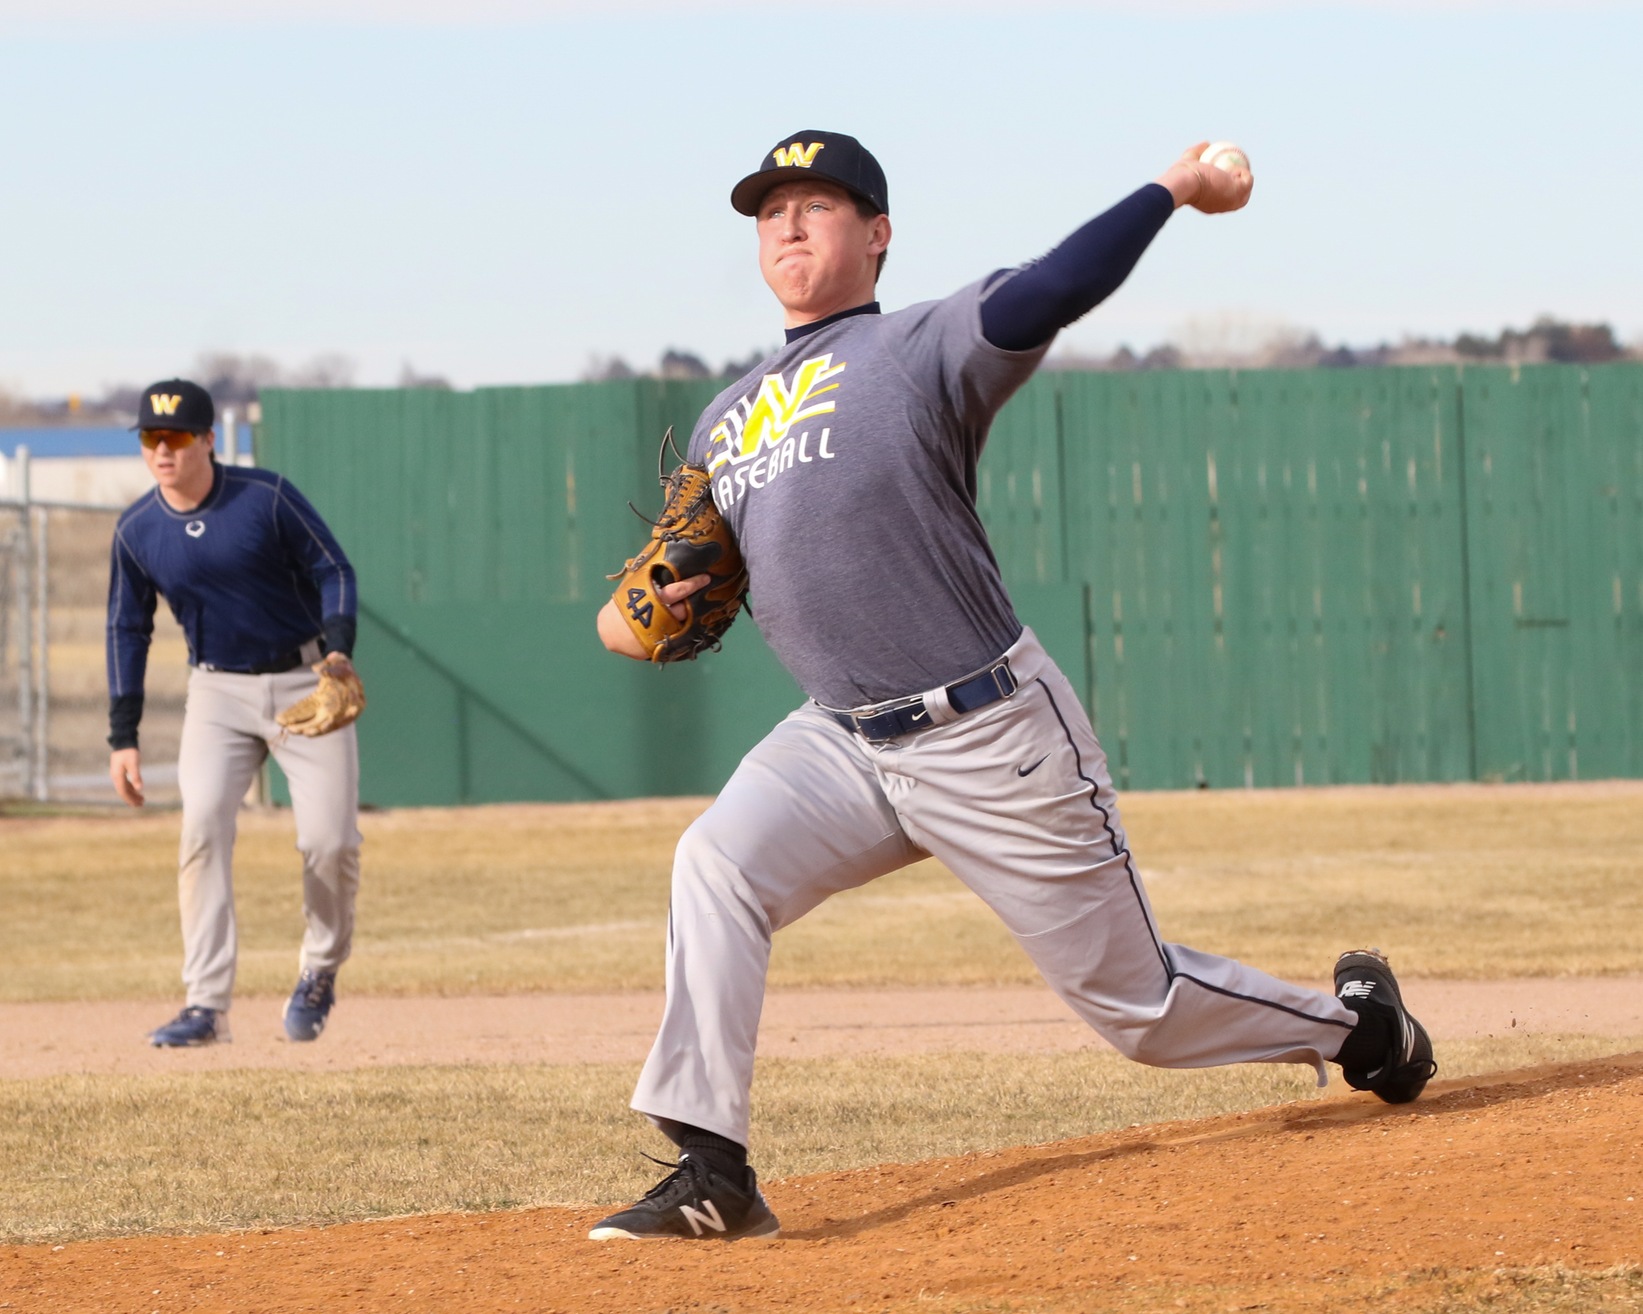 WNCC baseball ready to open season this weekend